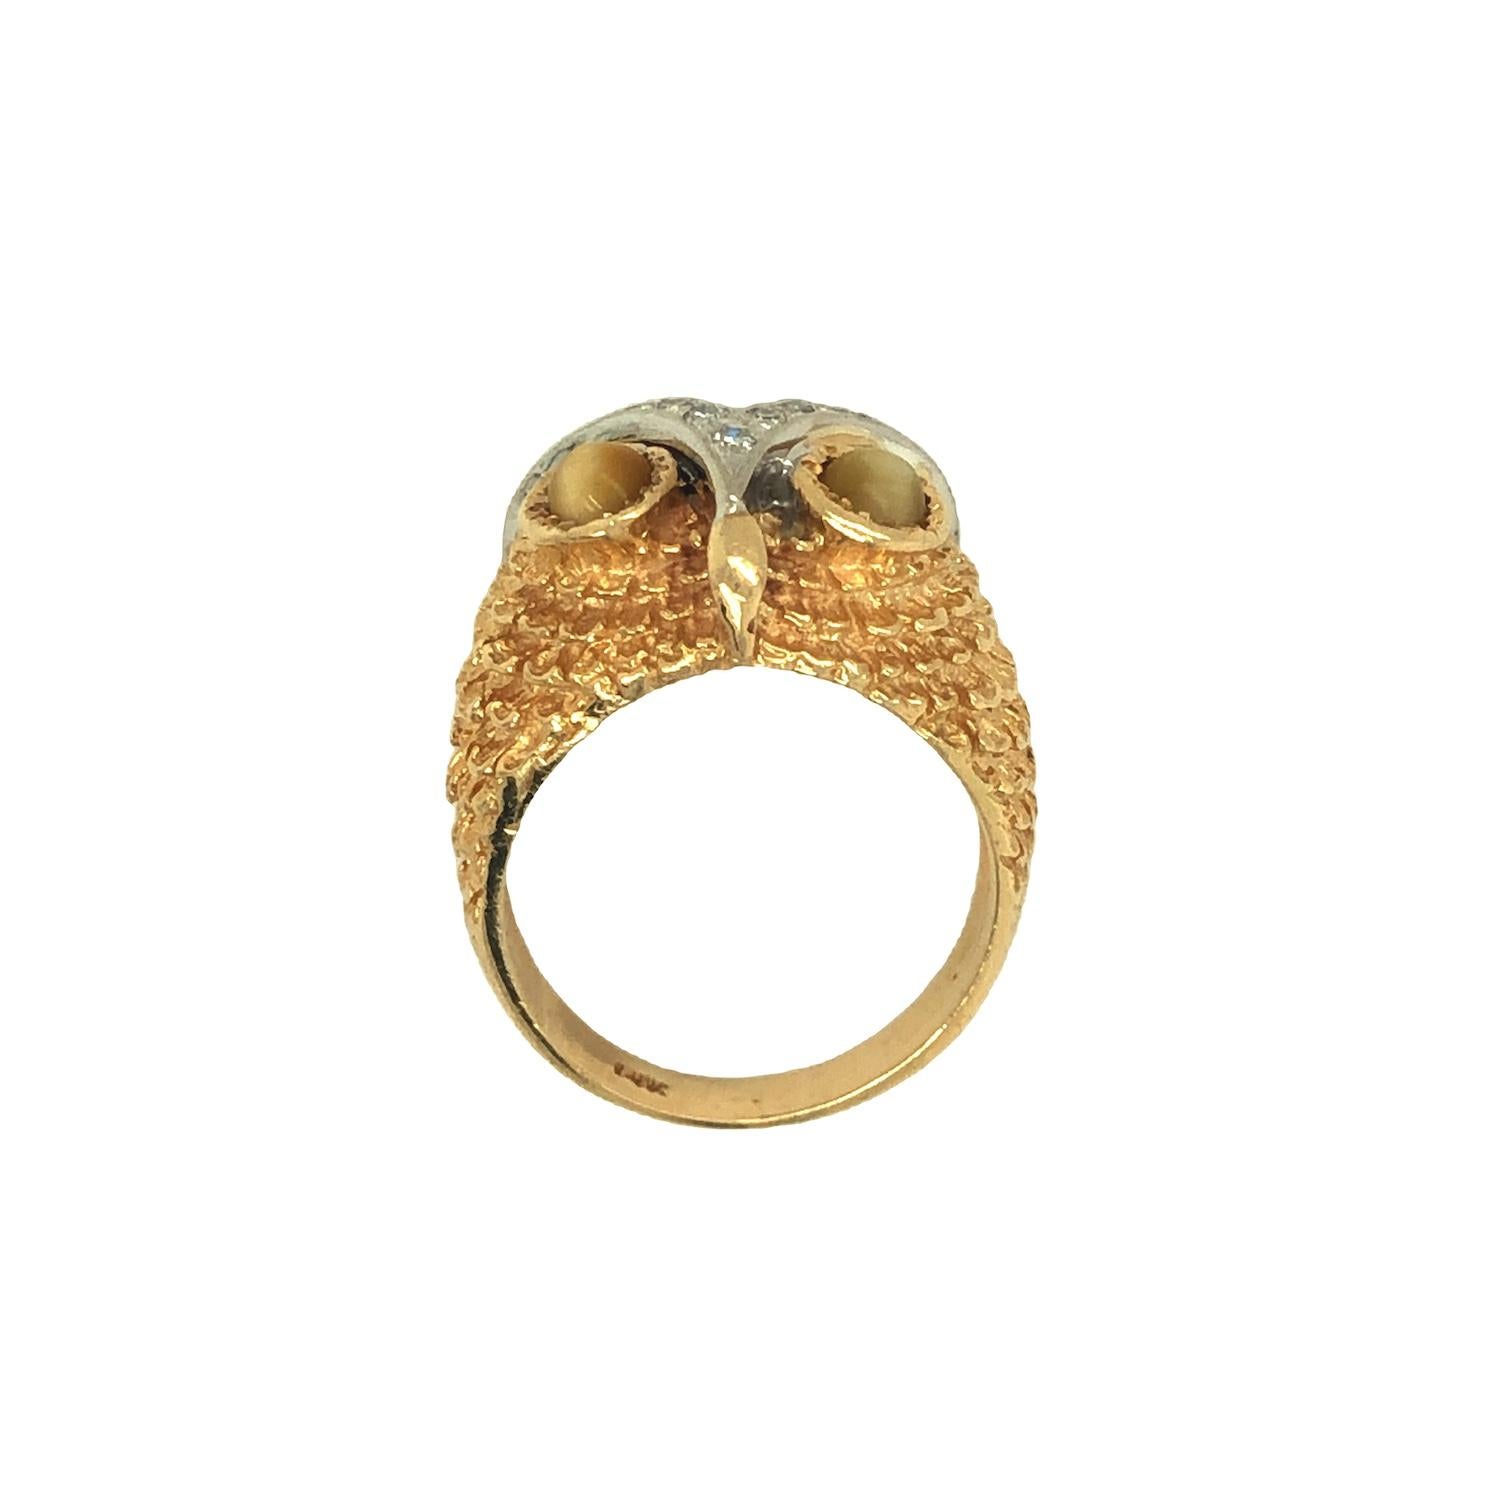 Women's or Men's Vintage Owl Ring with Tiger's Eyes and Diamond 14K Yellow Gold